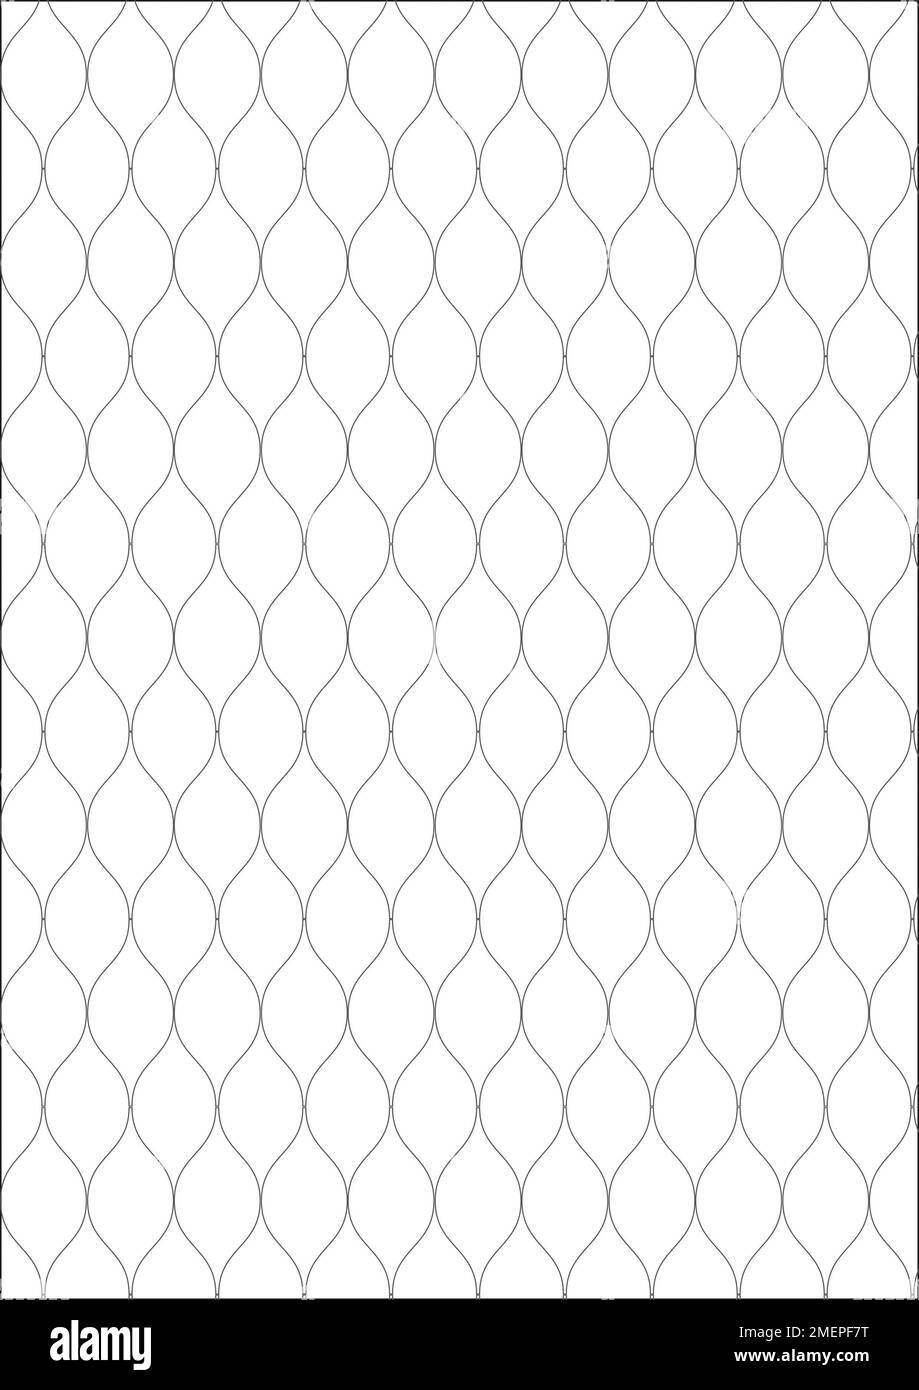 Background pattern with fishnet design Stock Photo